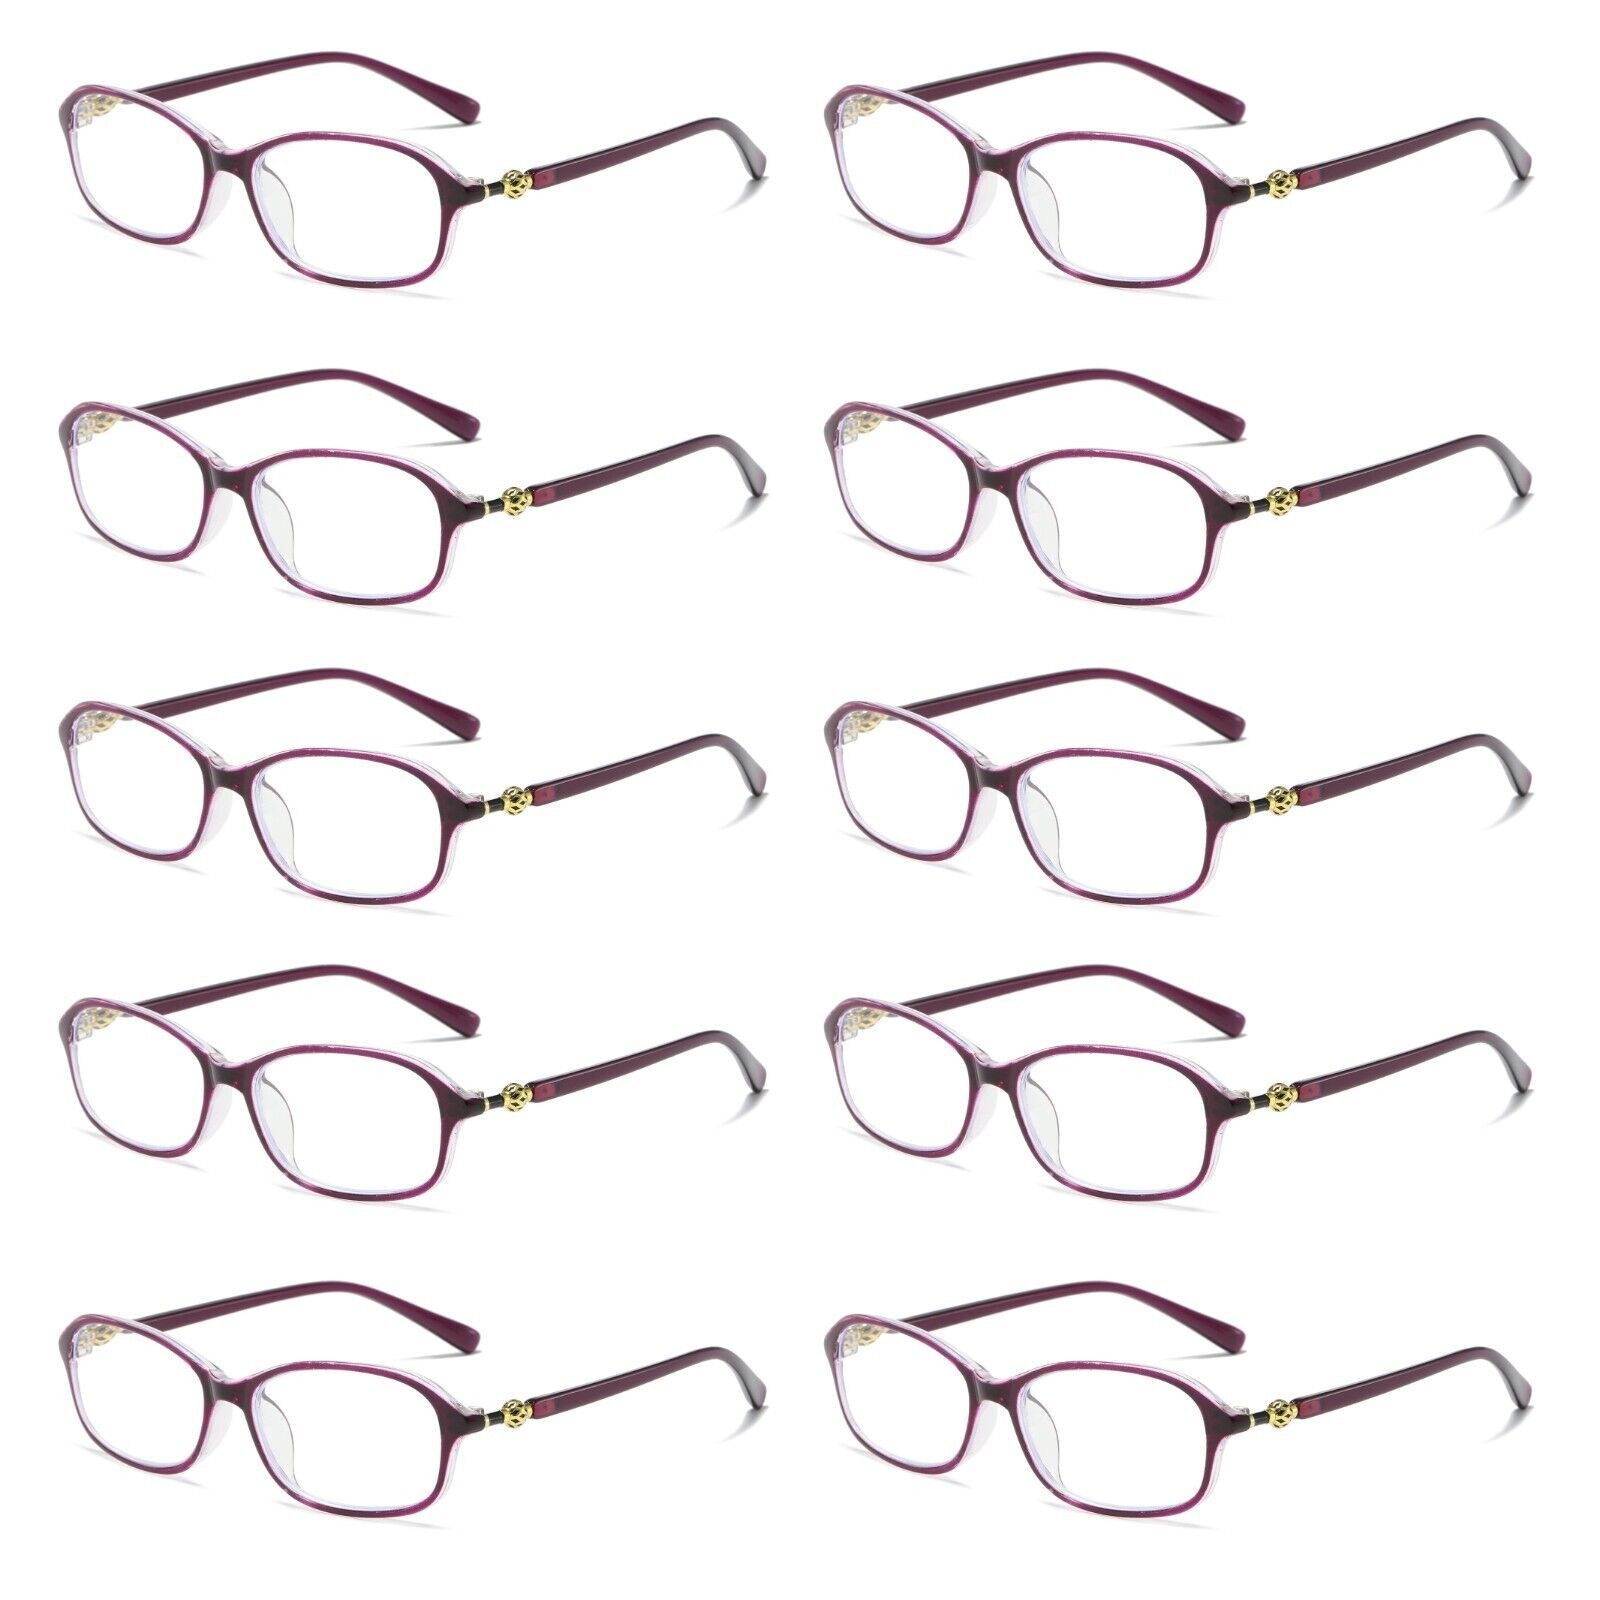 Primary image for 10 PK Womens Blue Light Blocking Reading Glasses Readers for Computer Paper Work